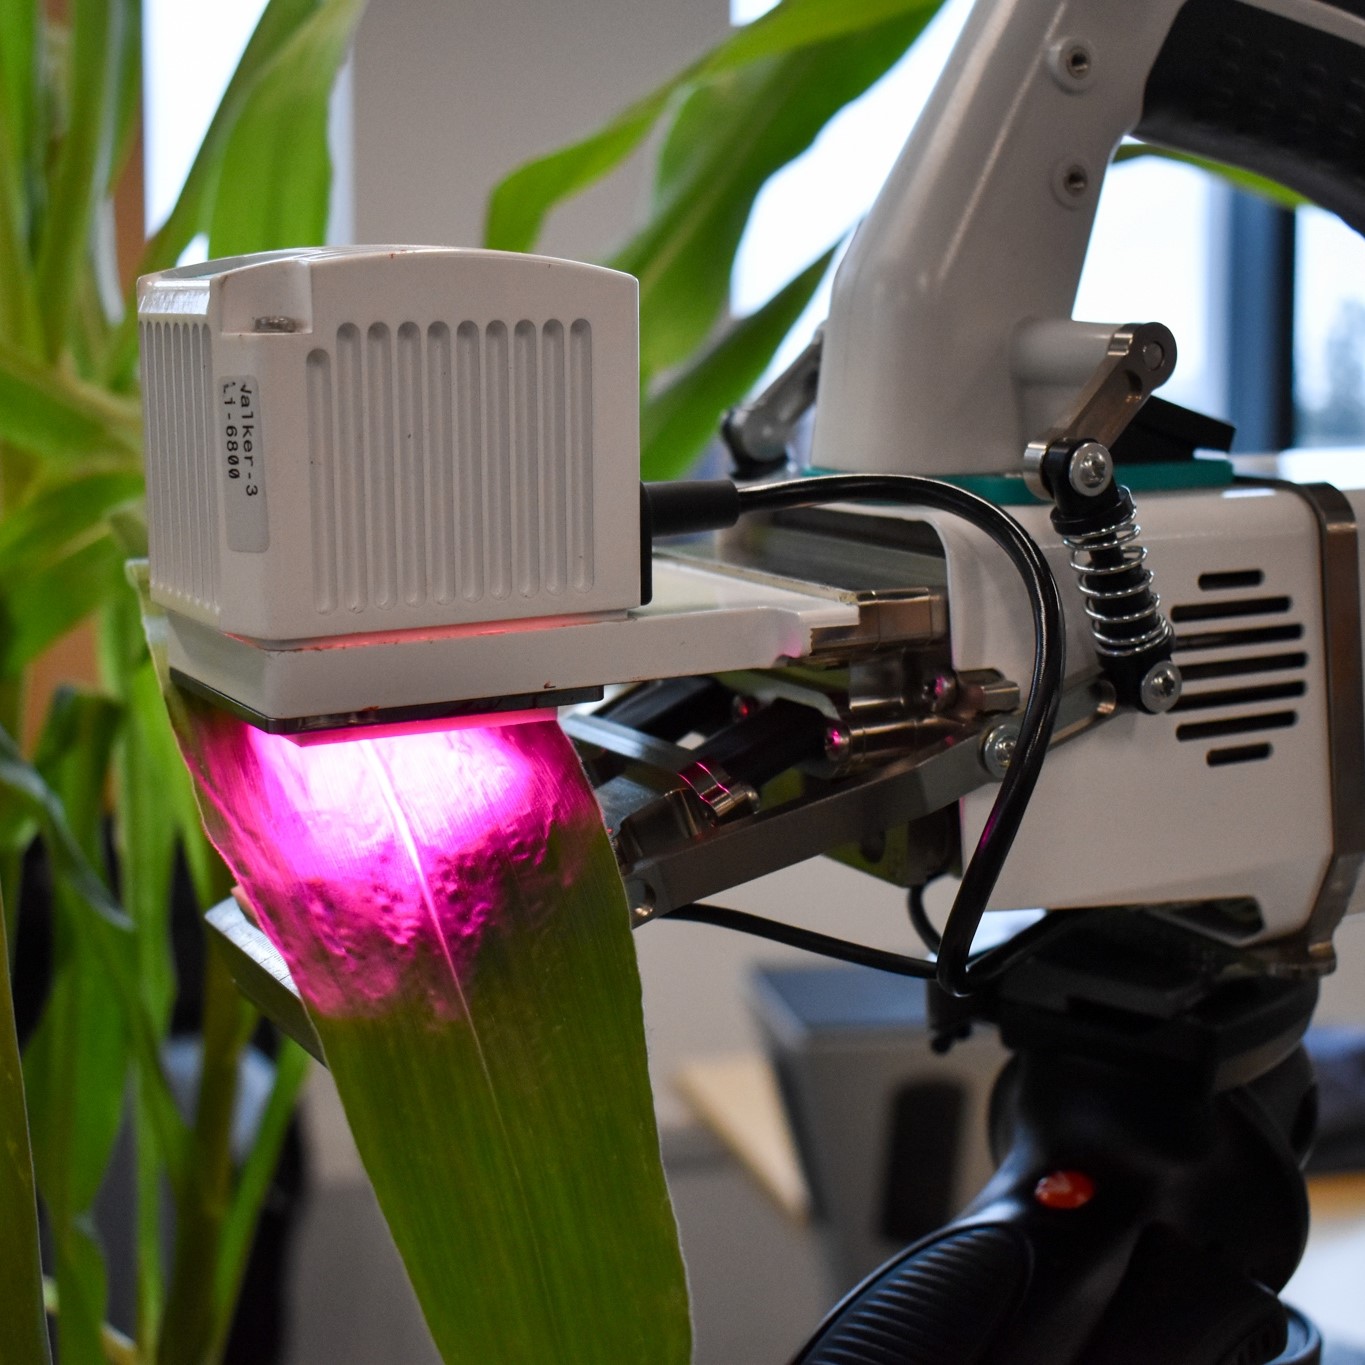 A scientific instrument clamps on the leaf of a plant, emitting pink light onto the leaf